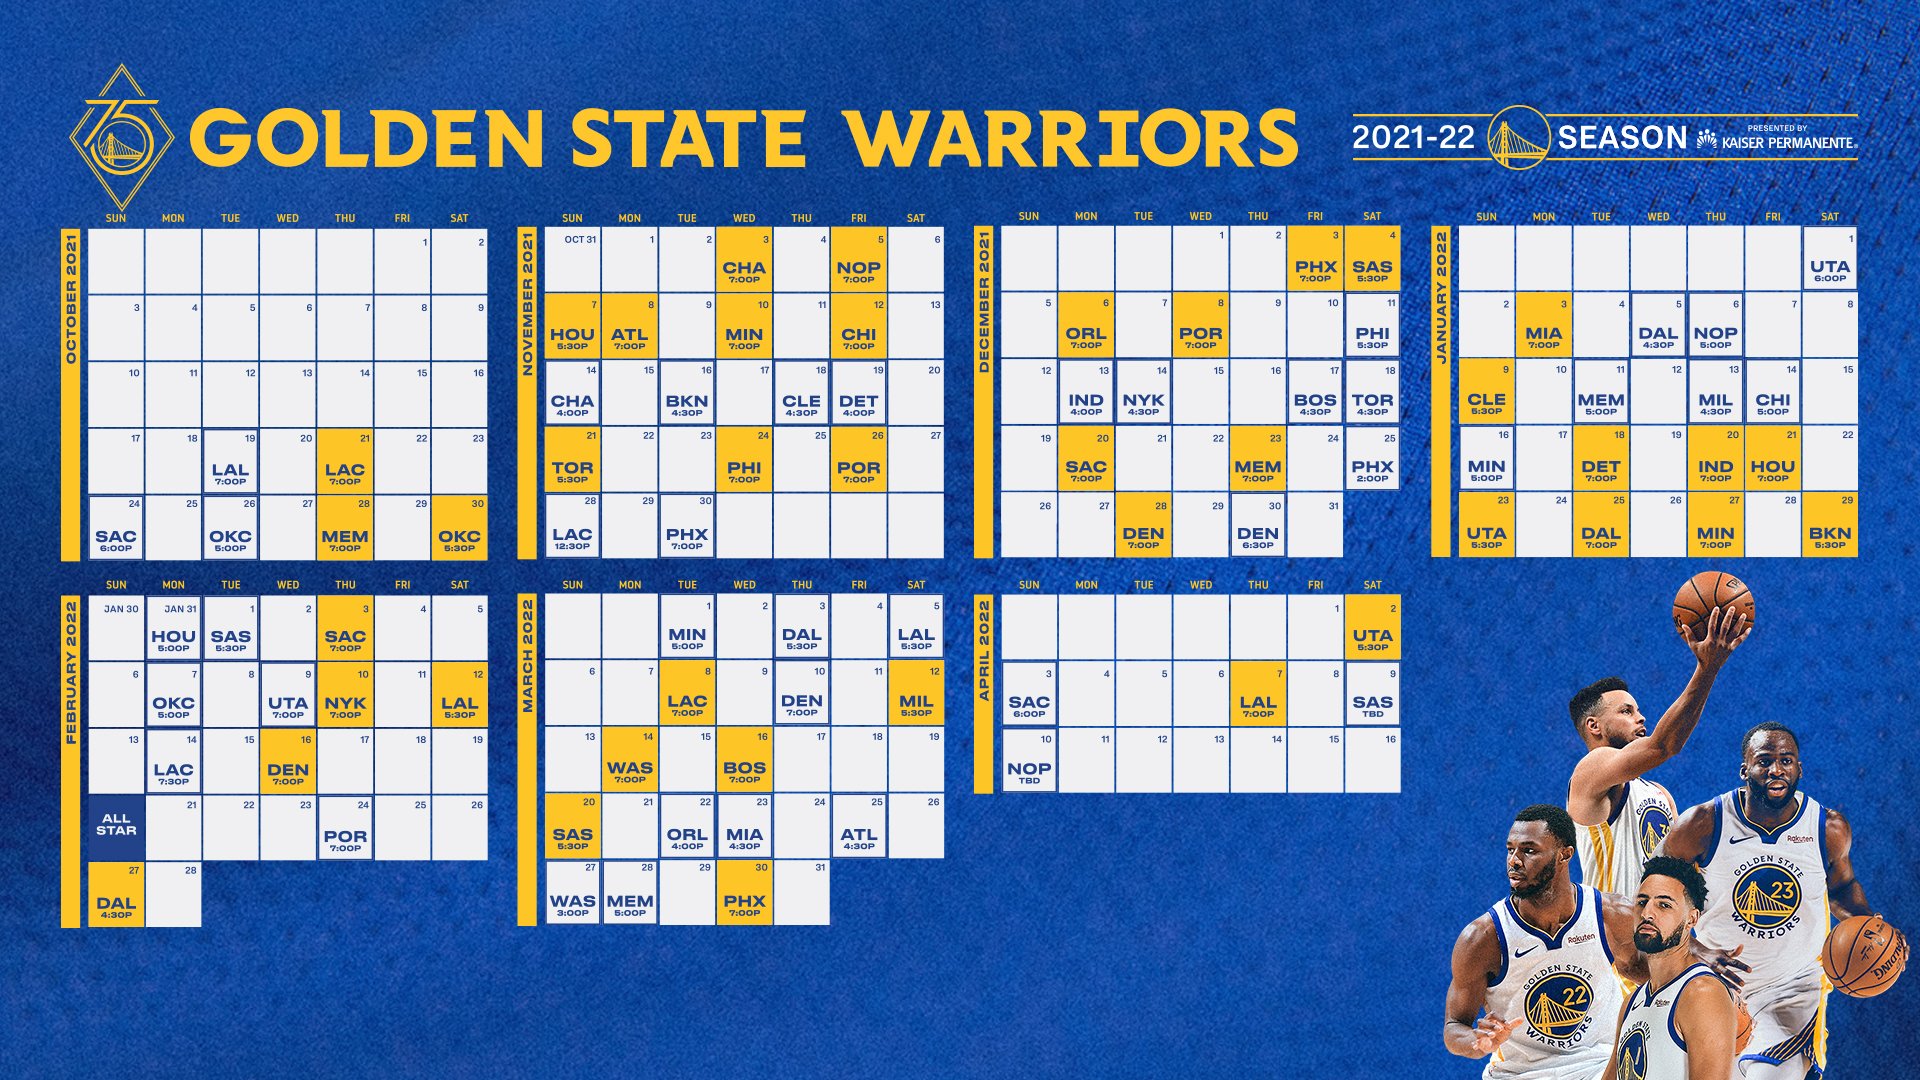 Golden State Warriors on Twitter "Update those screens and make sure